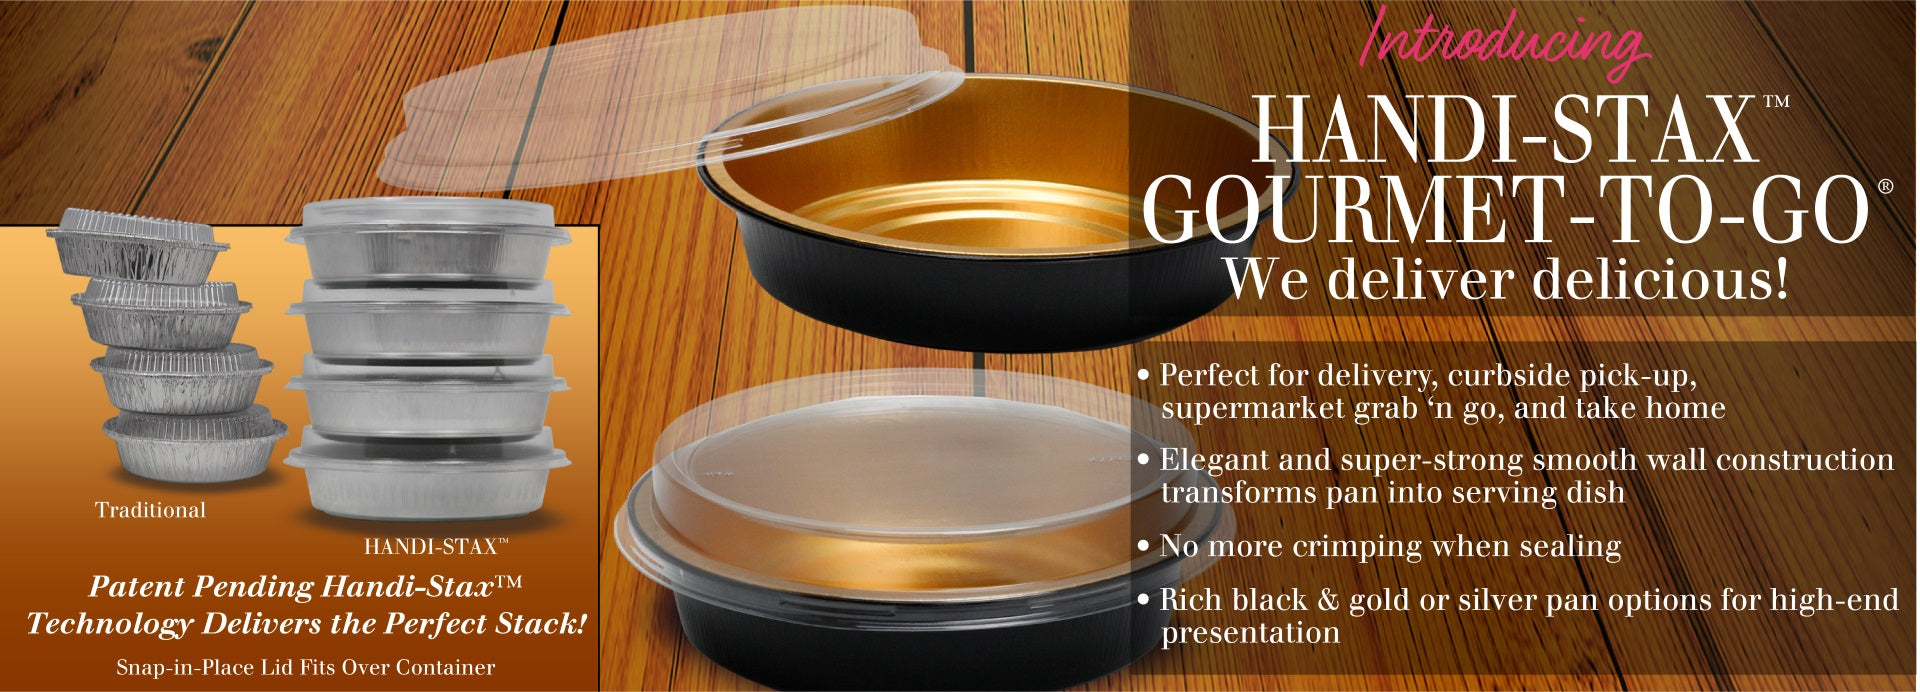 10 Inch Pie Container High Dome Lid - Kitchendance